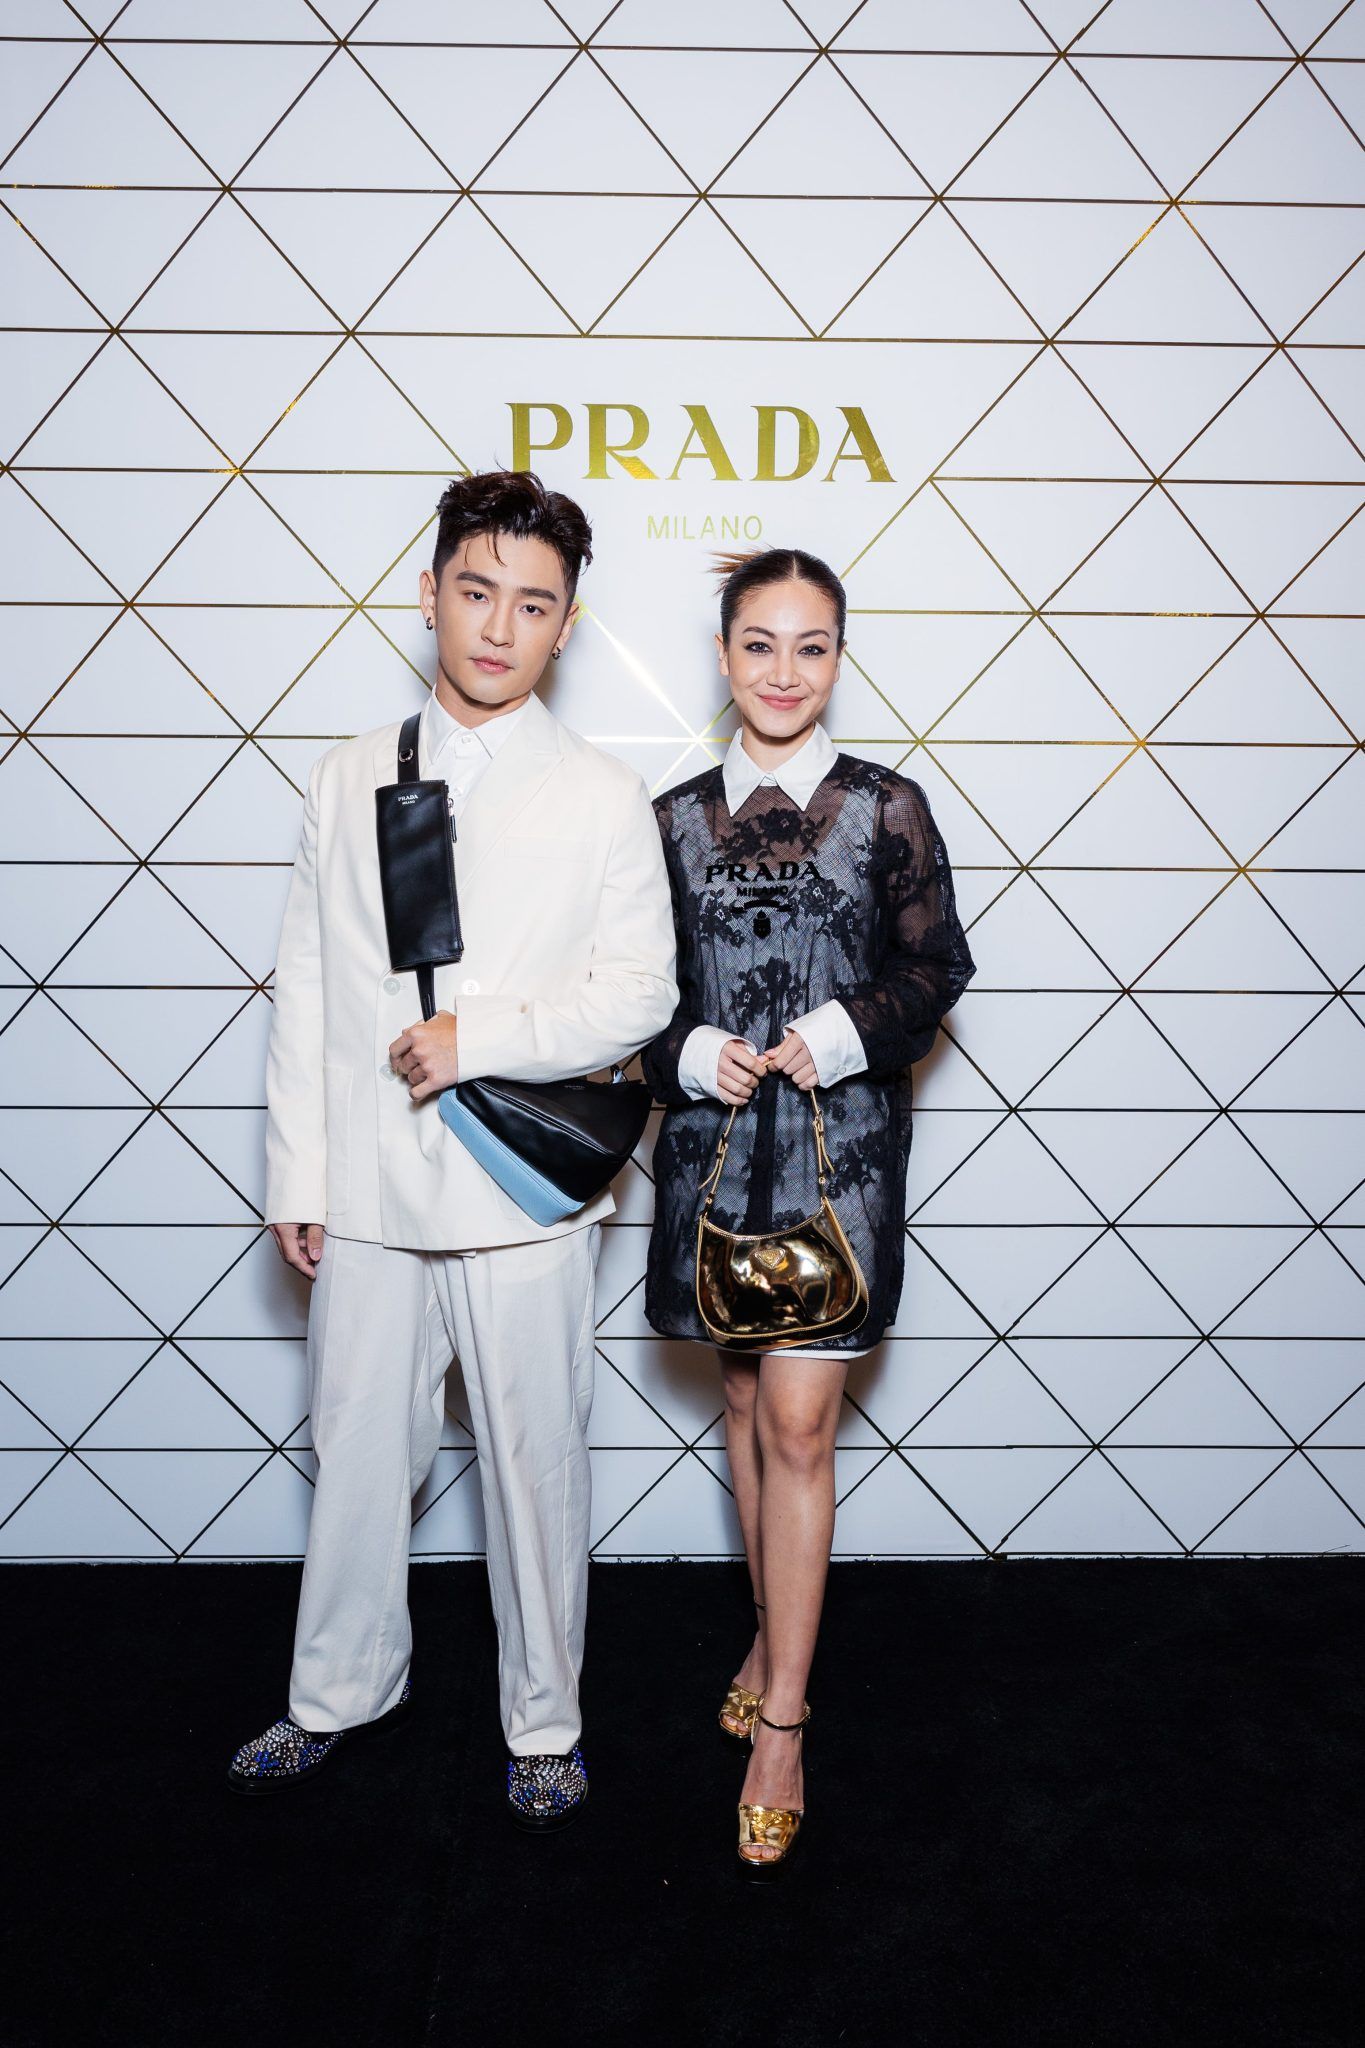 Prada celebrates its reopening in Pavilion KL with a star-studded affair